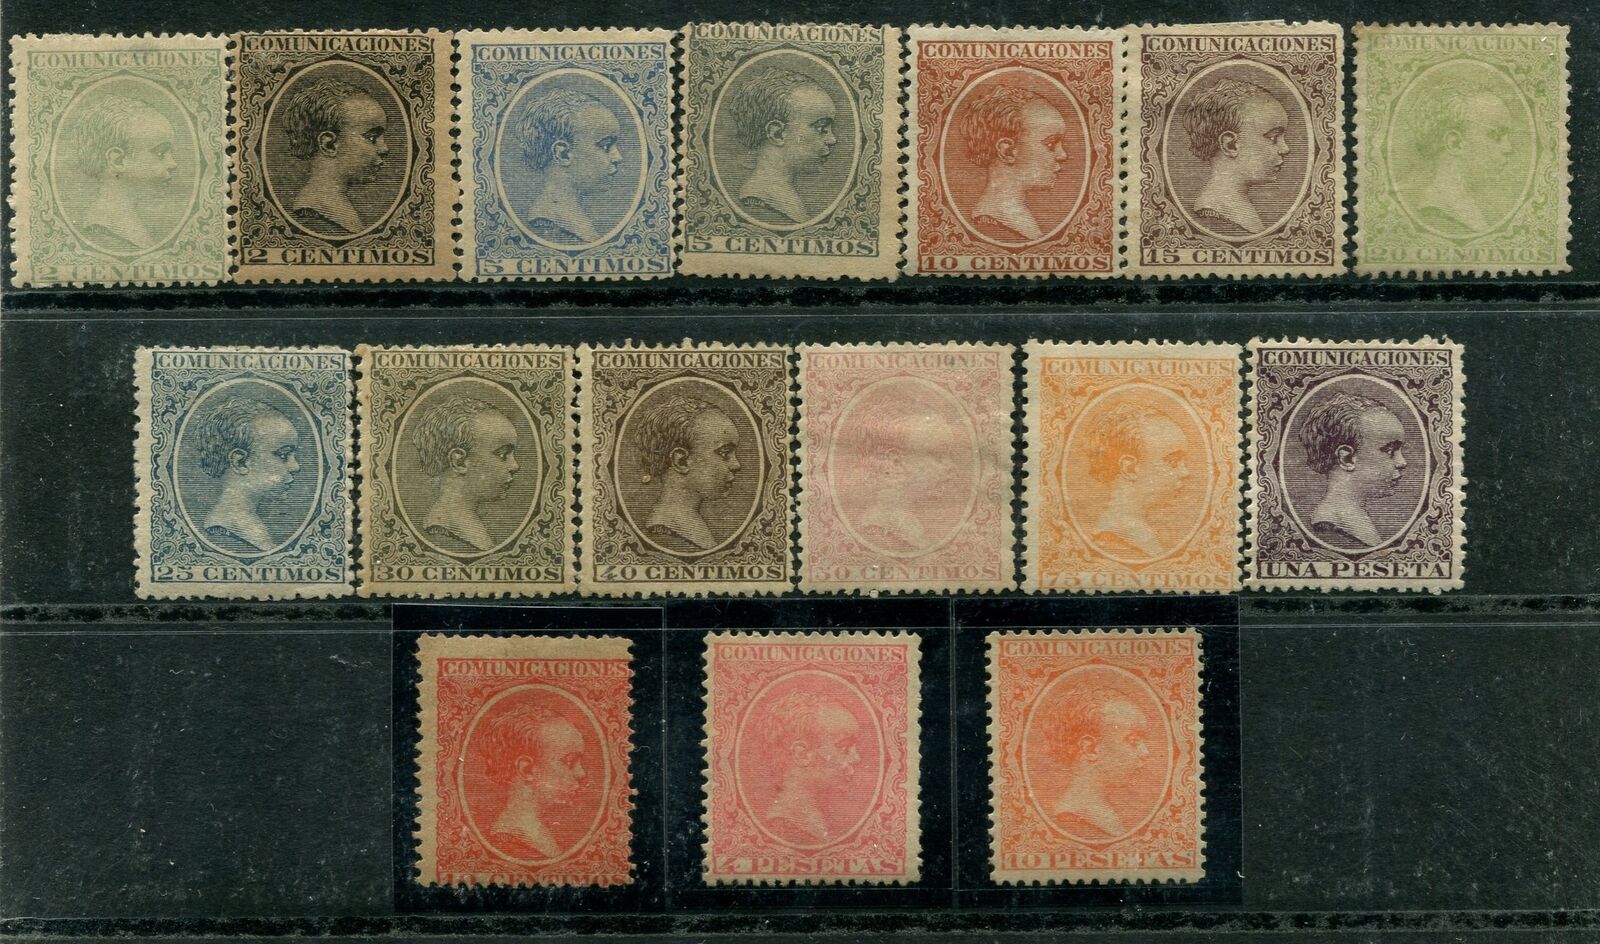 Spain Series 1889 / Most Well Focused/16 Stamps/Occasion /( ) 21